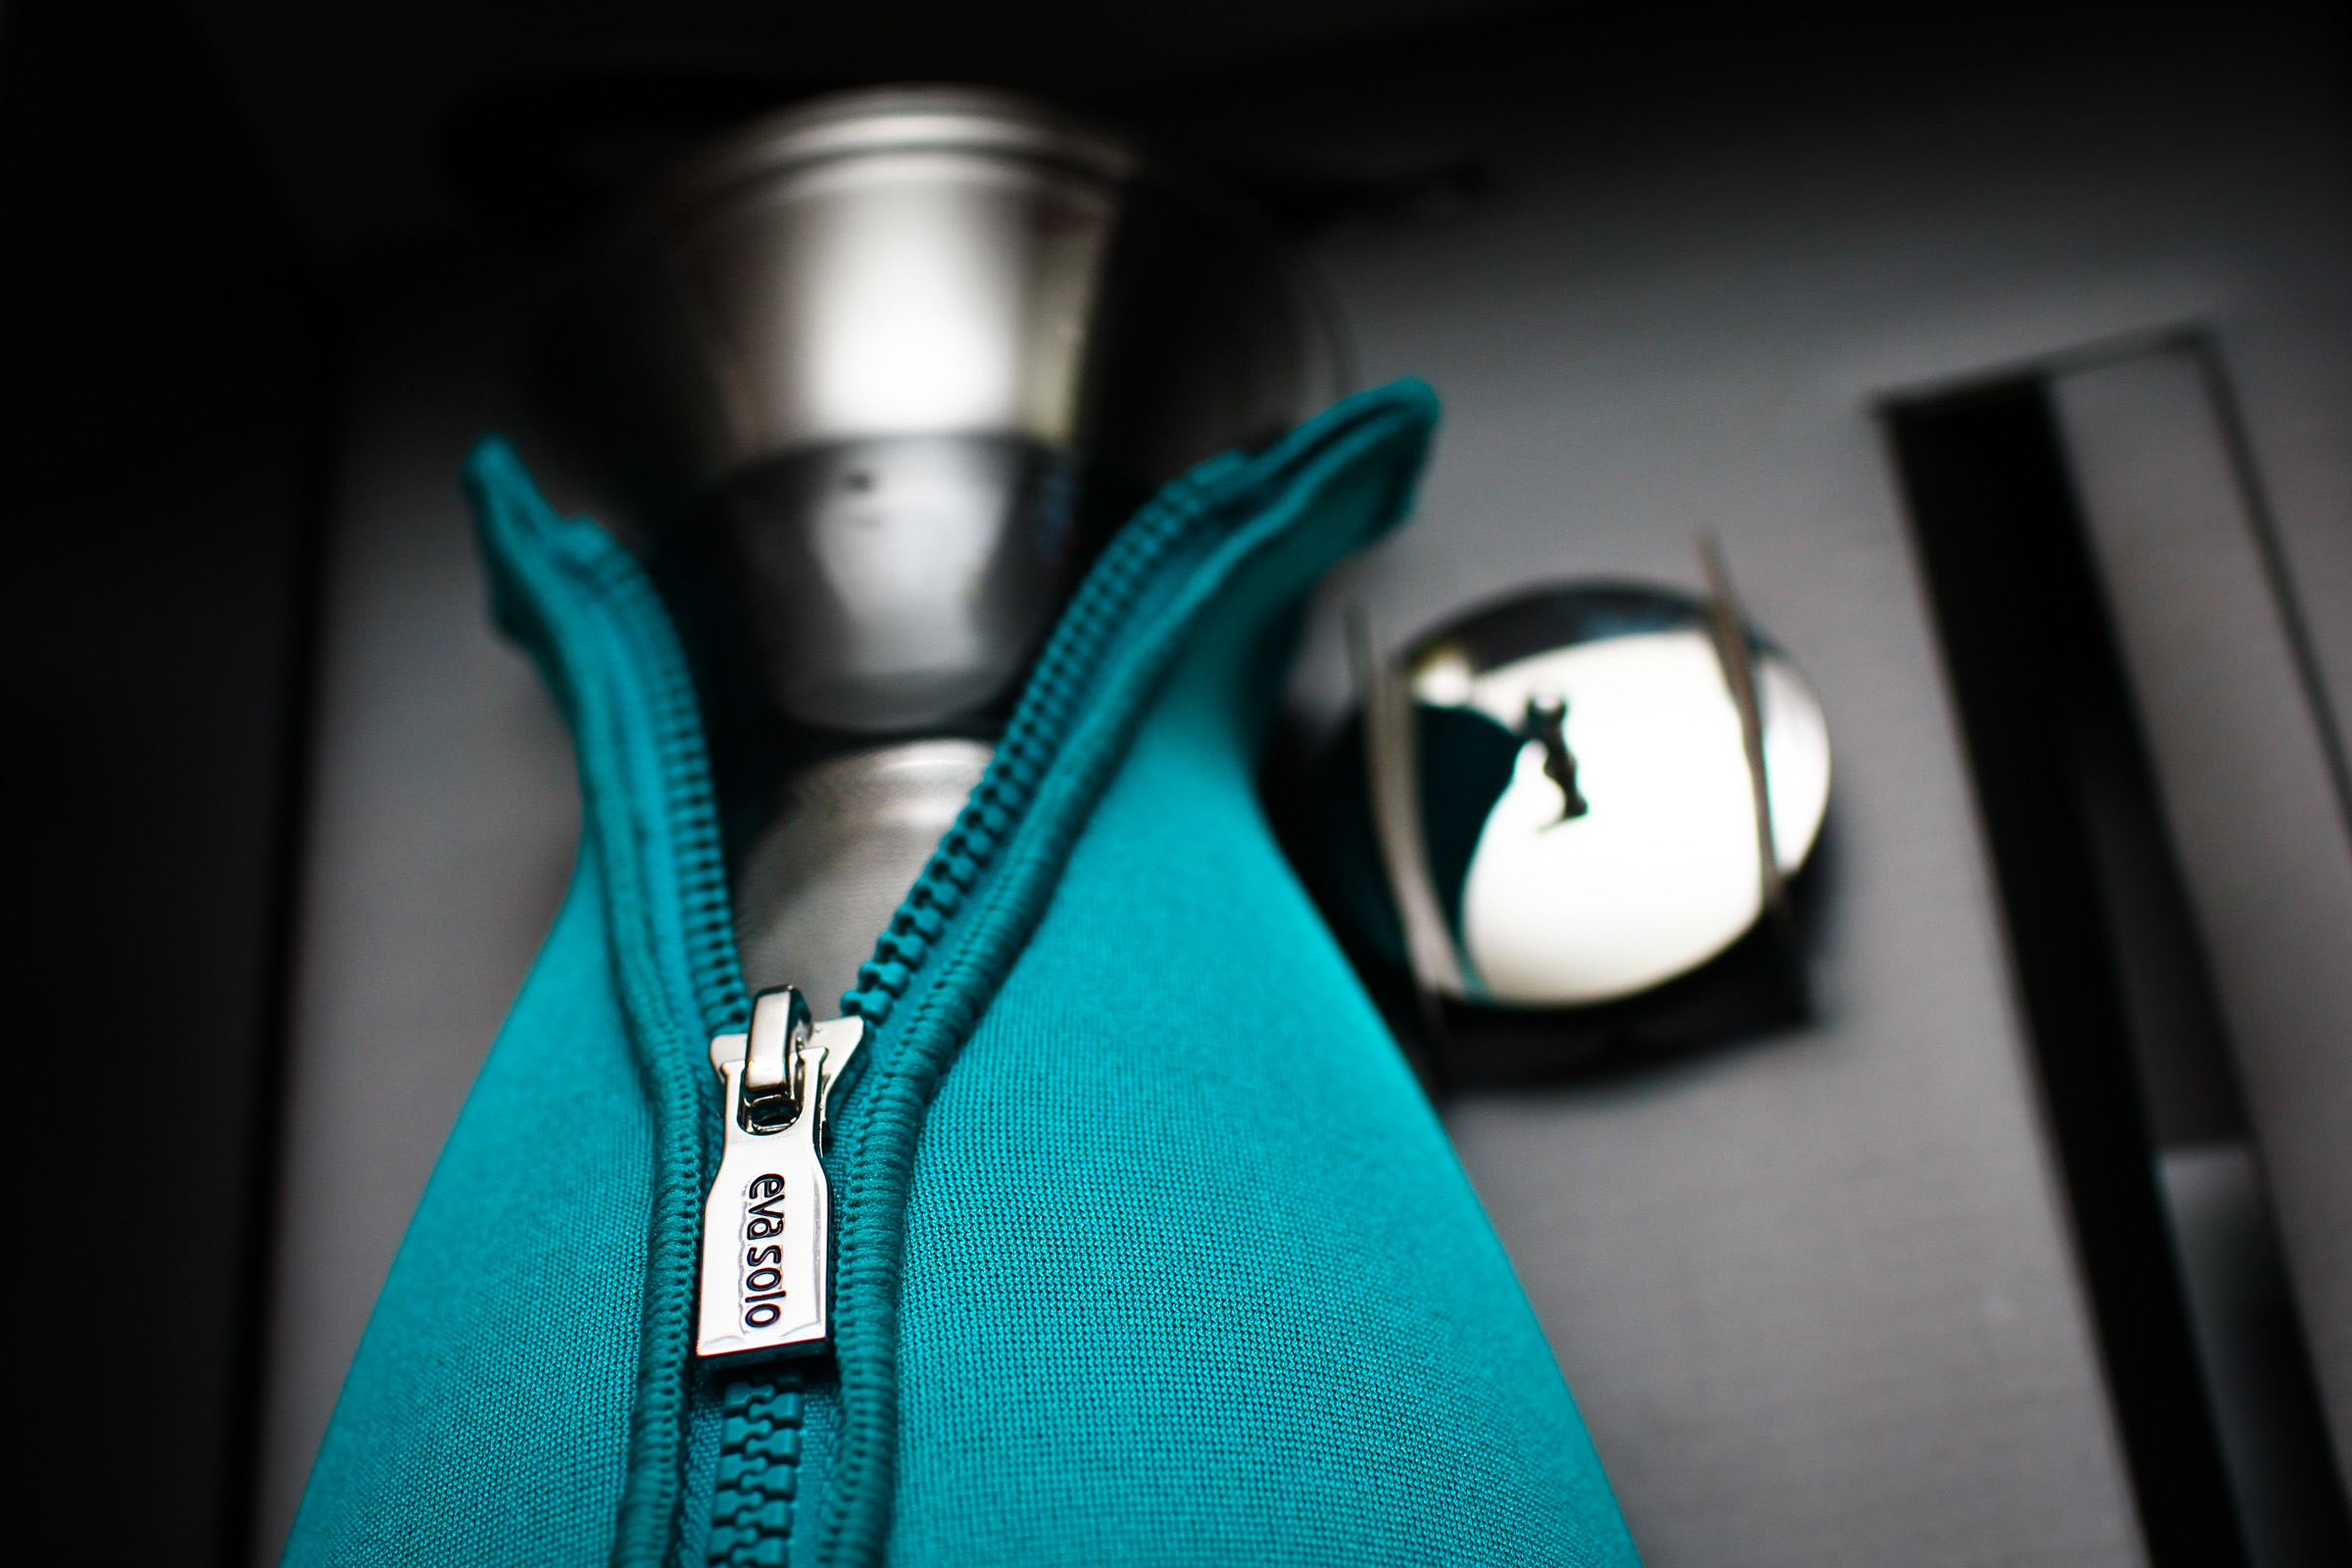 Detail photo of the Eva Solo Cafe Solo coffee brewer, including the teal blue wrap.